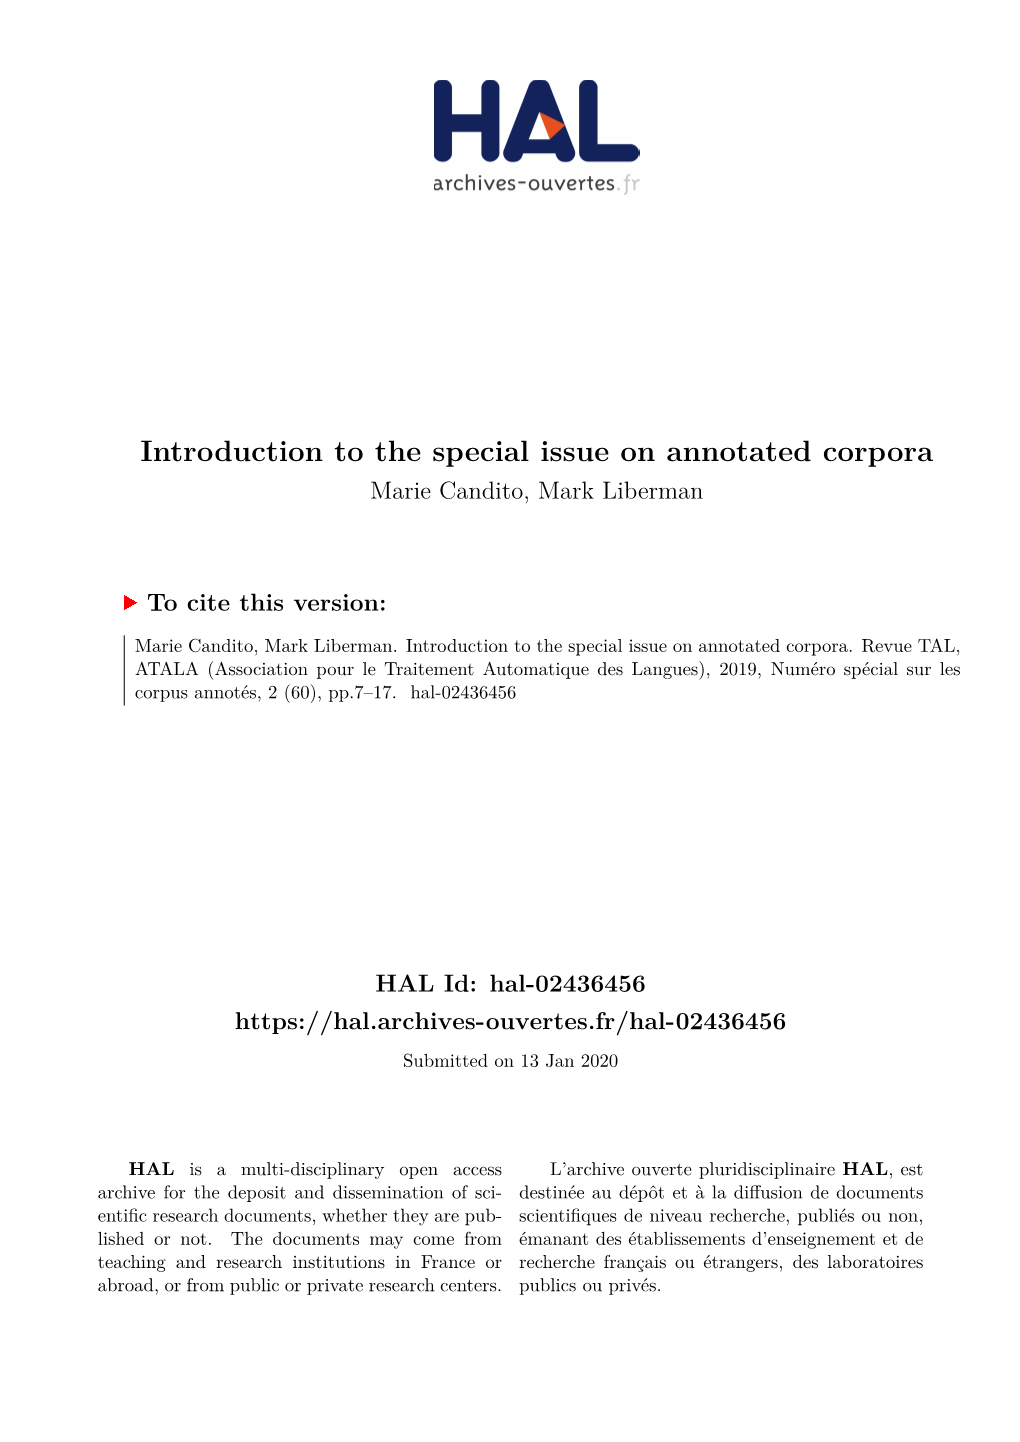 Introduction to the Special Issue on Annotated Corpora Marie Candito, Mark Liberman